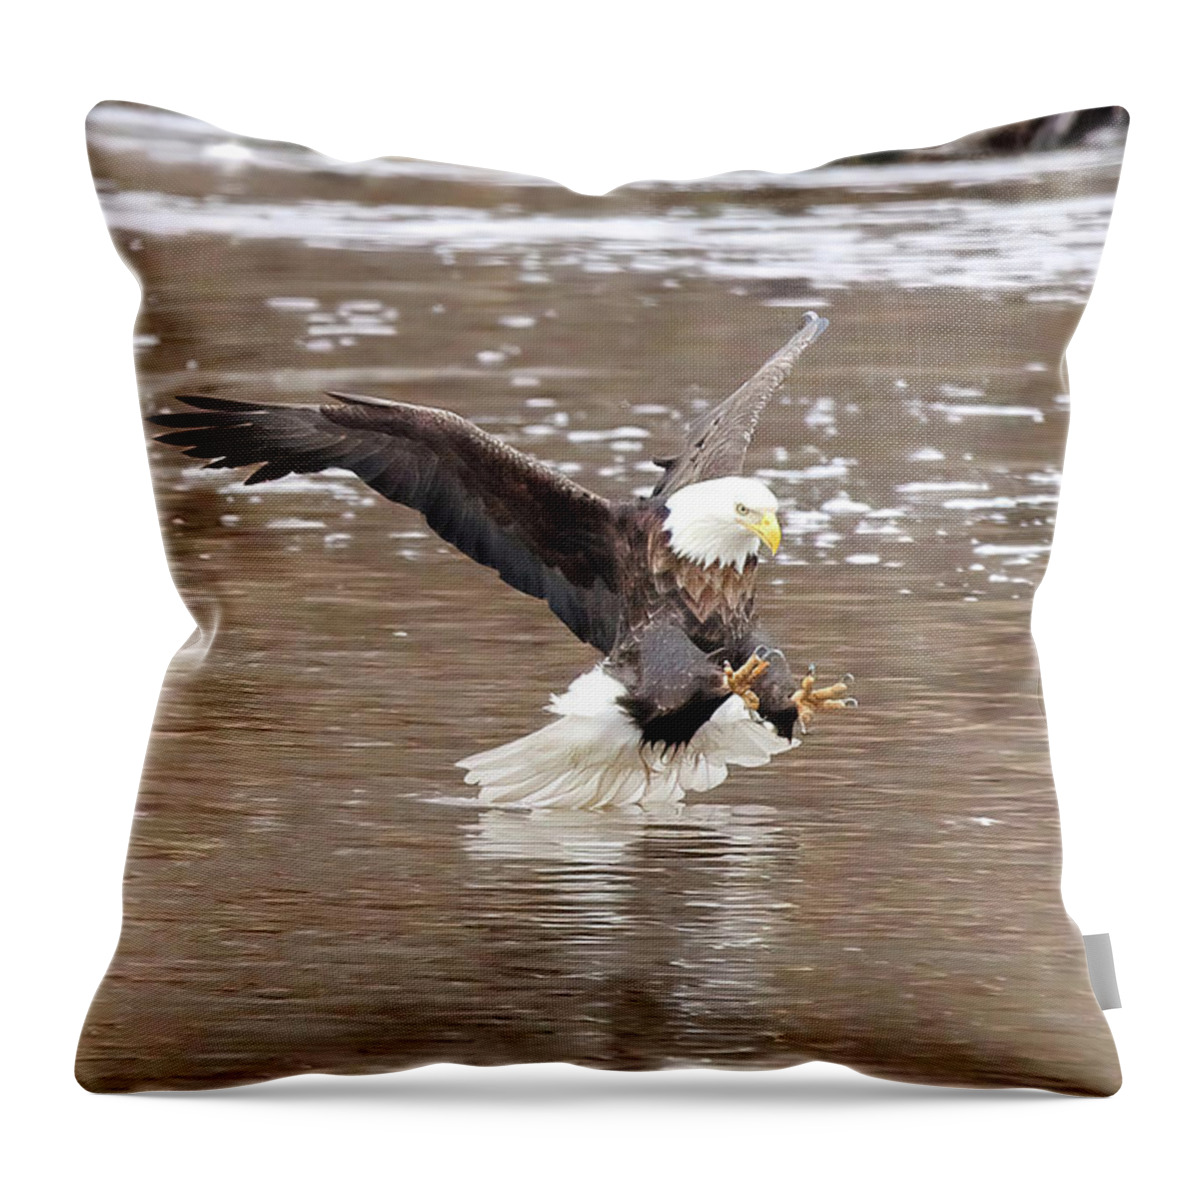 Bird Throw Pillow featuring the photograph Focus by Lens Art Photography By Larry Trager